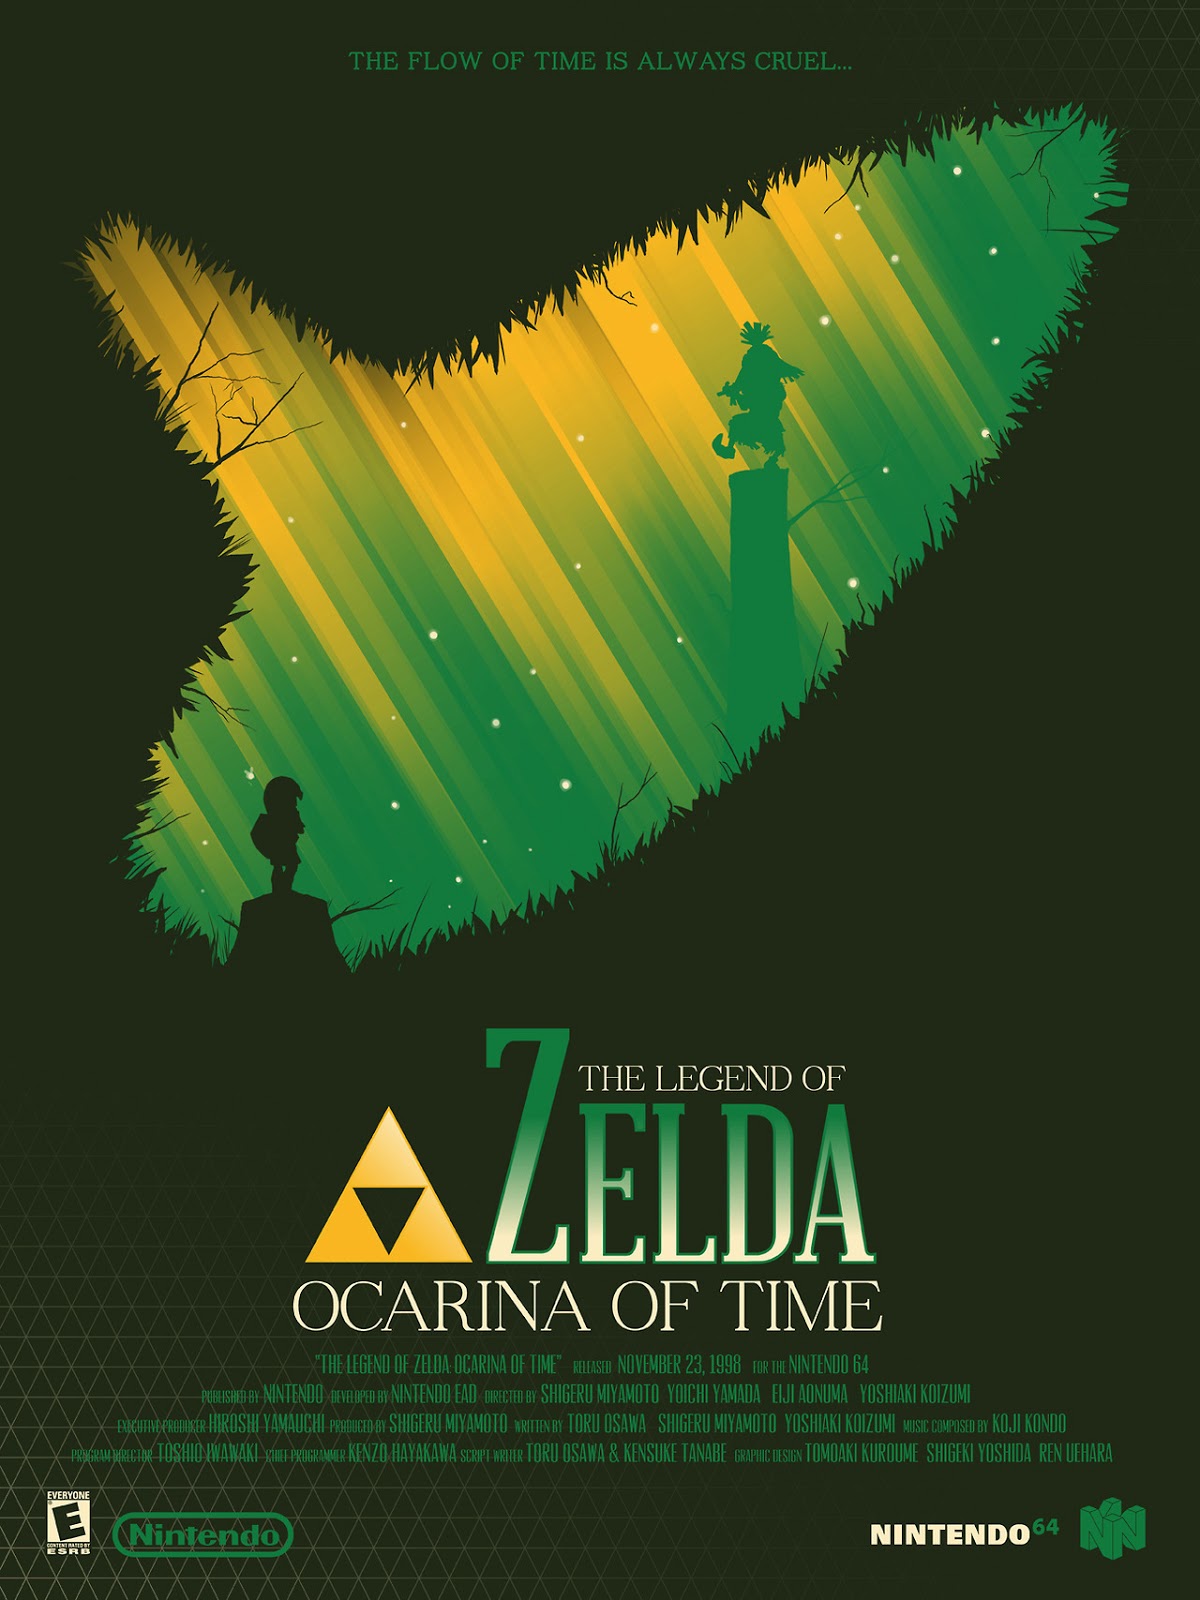 The Geeky Nerfherder: Cool Art: 'The Legend Of Zelda' Posters by